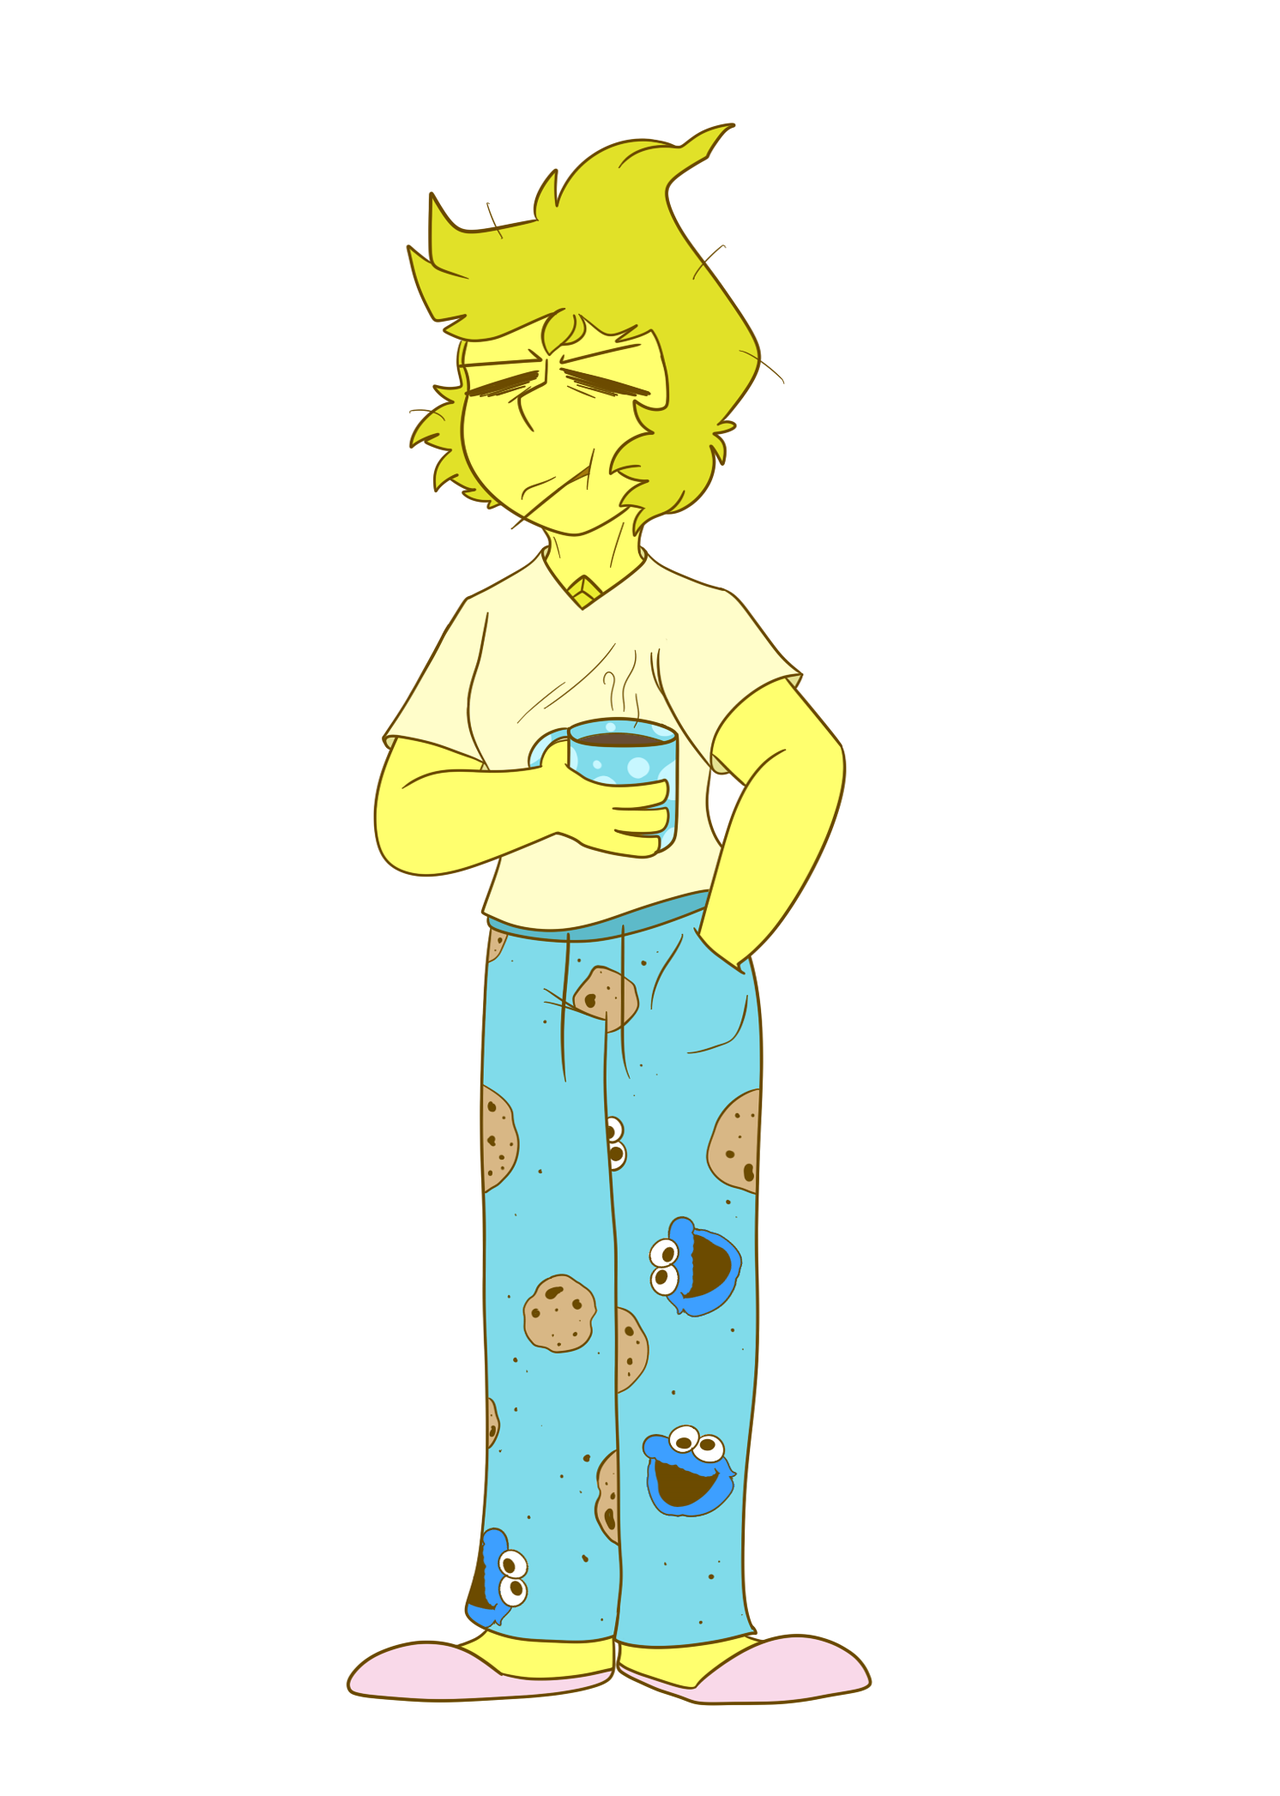 //lowkey just wanted to draw Yellow in these pants…..